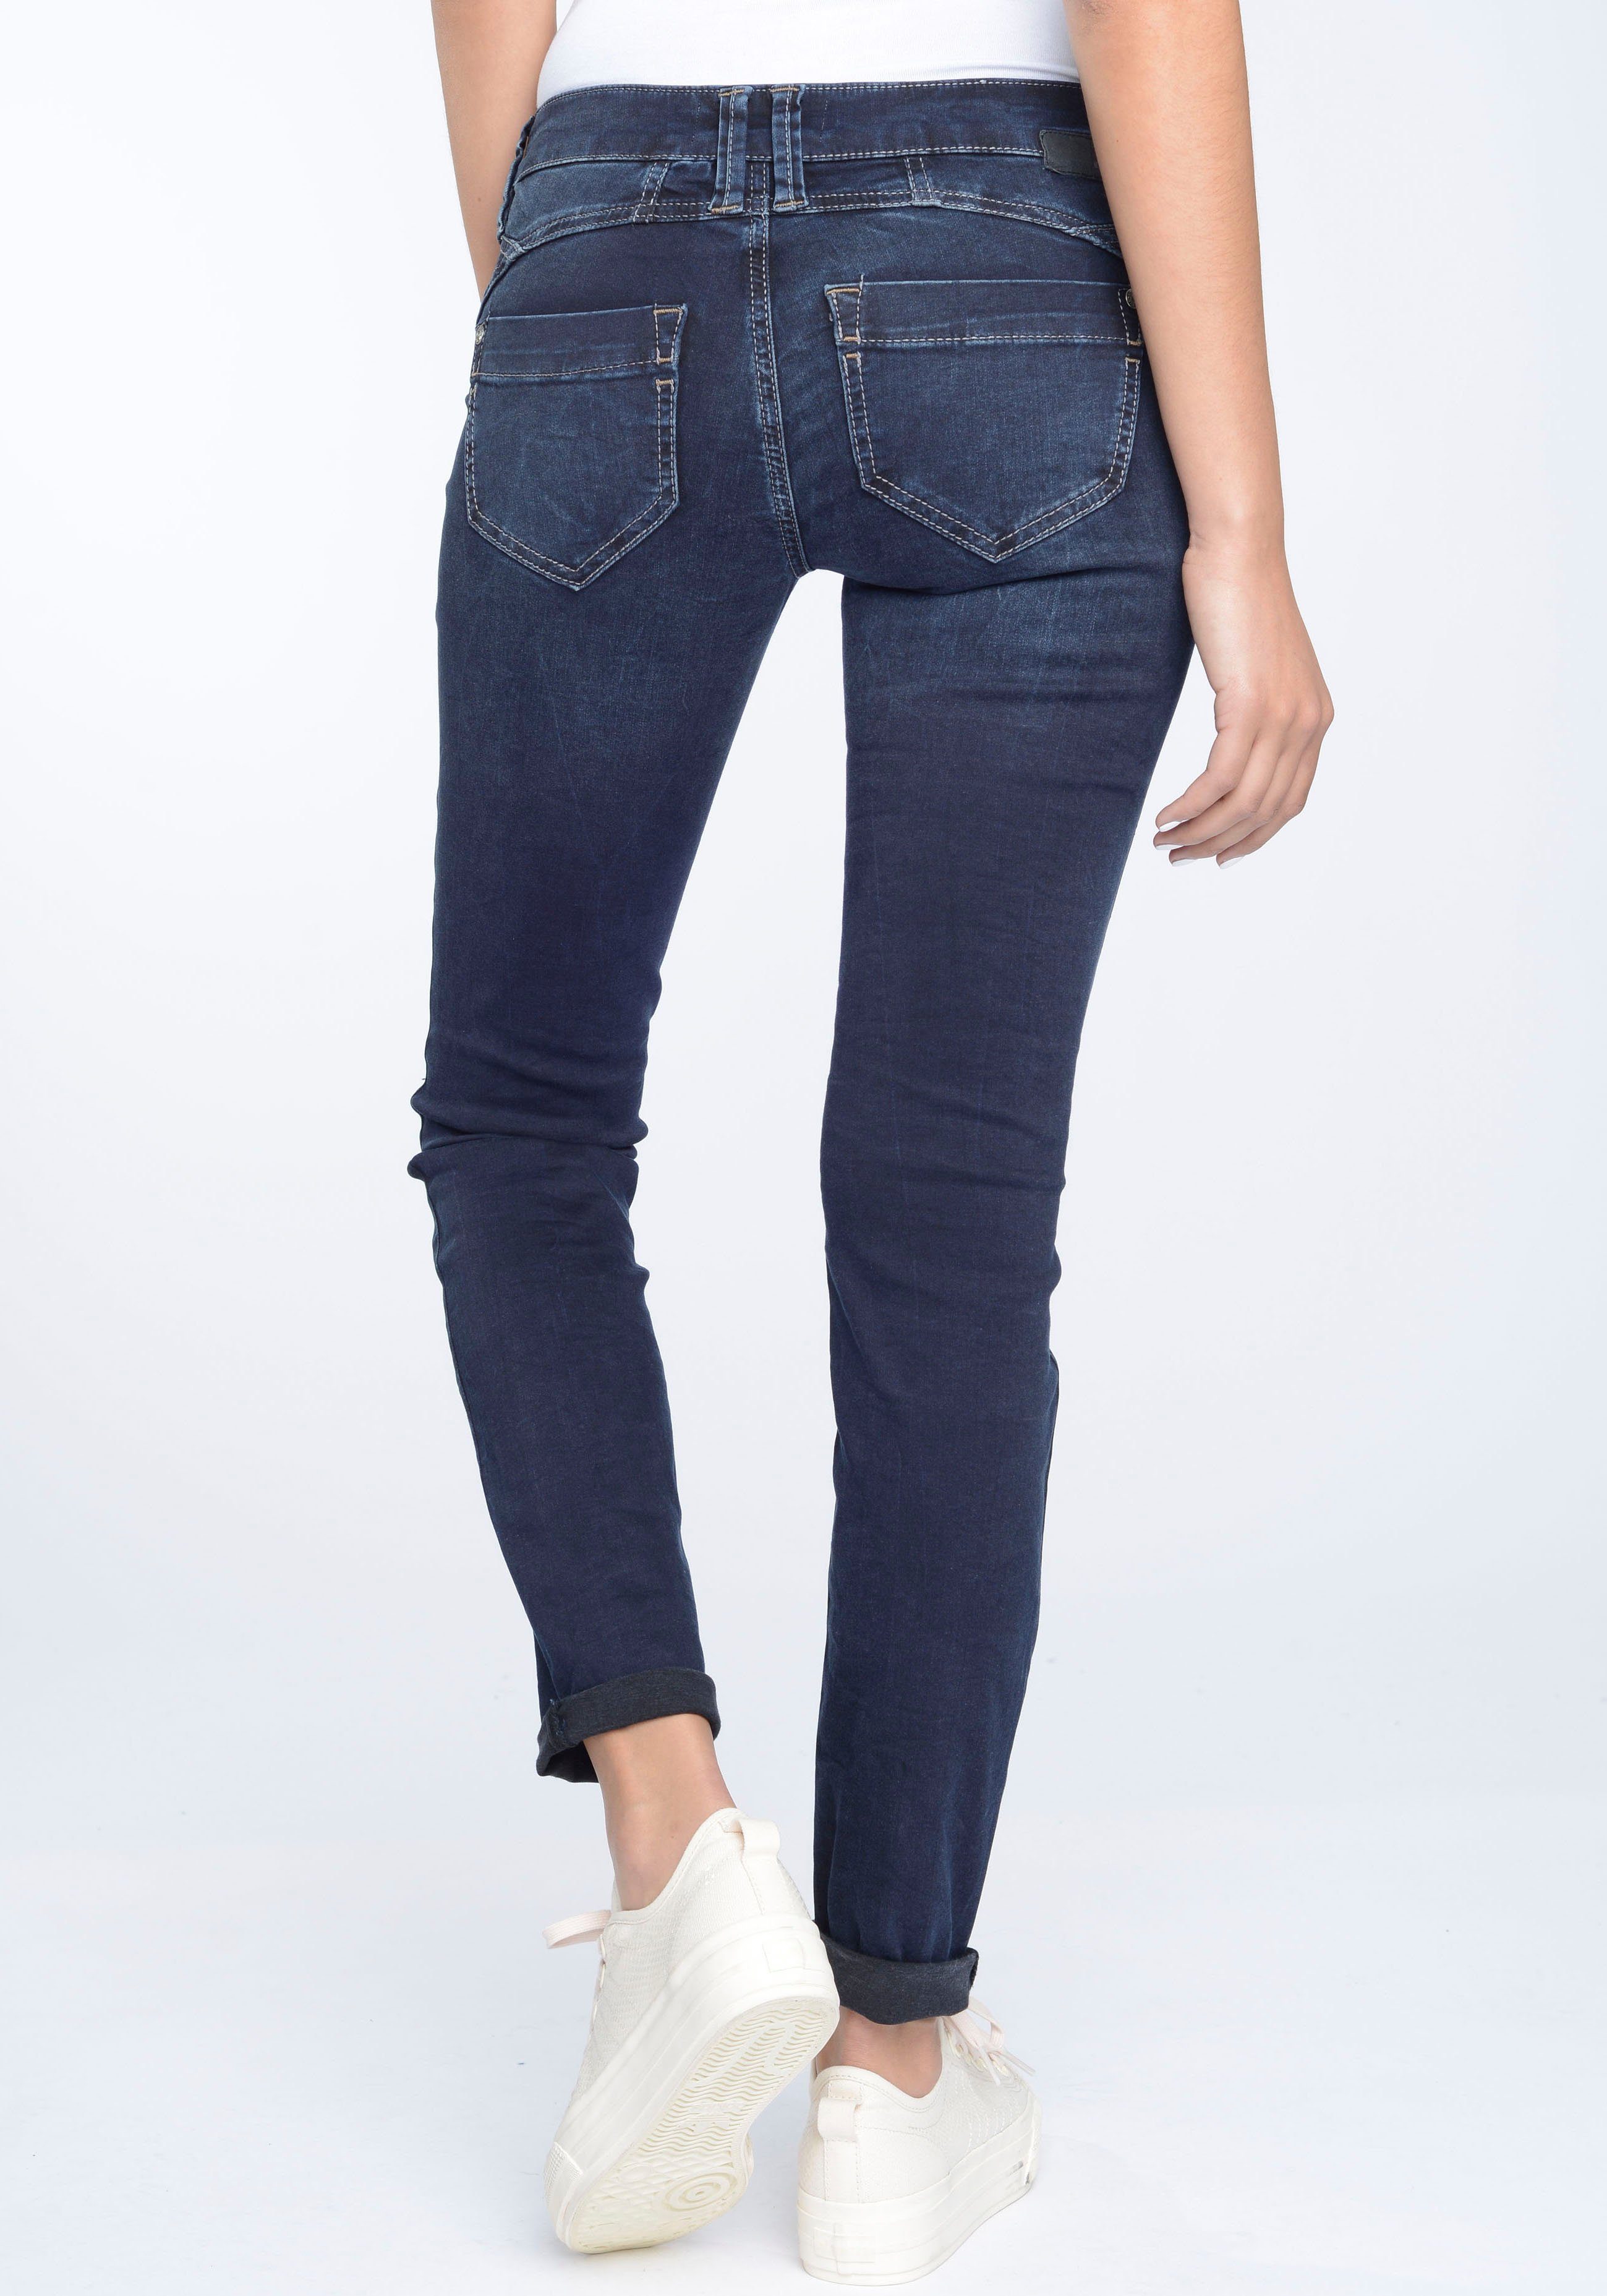 GANG Skinny-fit-Jeans 94Nena in authenischer used dark Used-Waschung